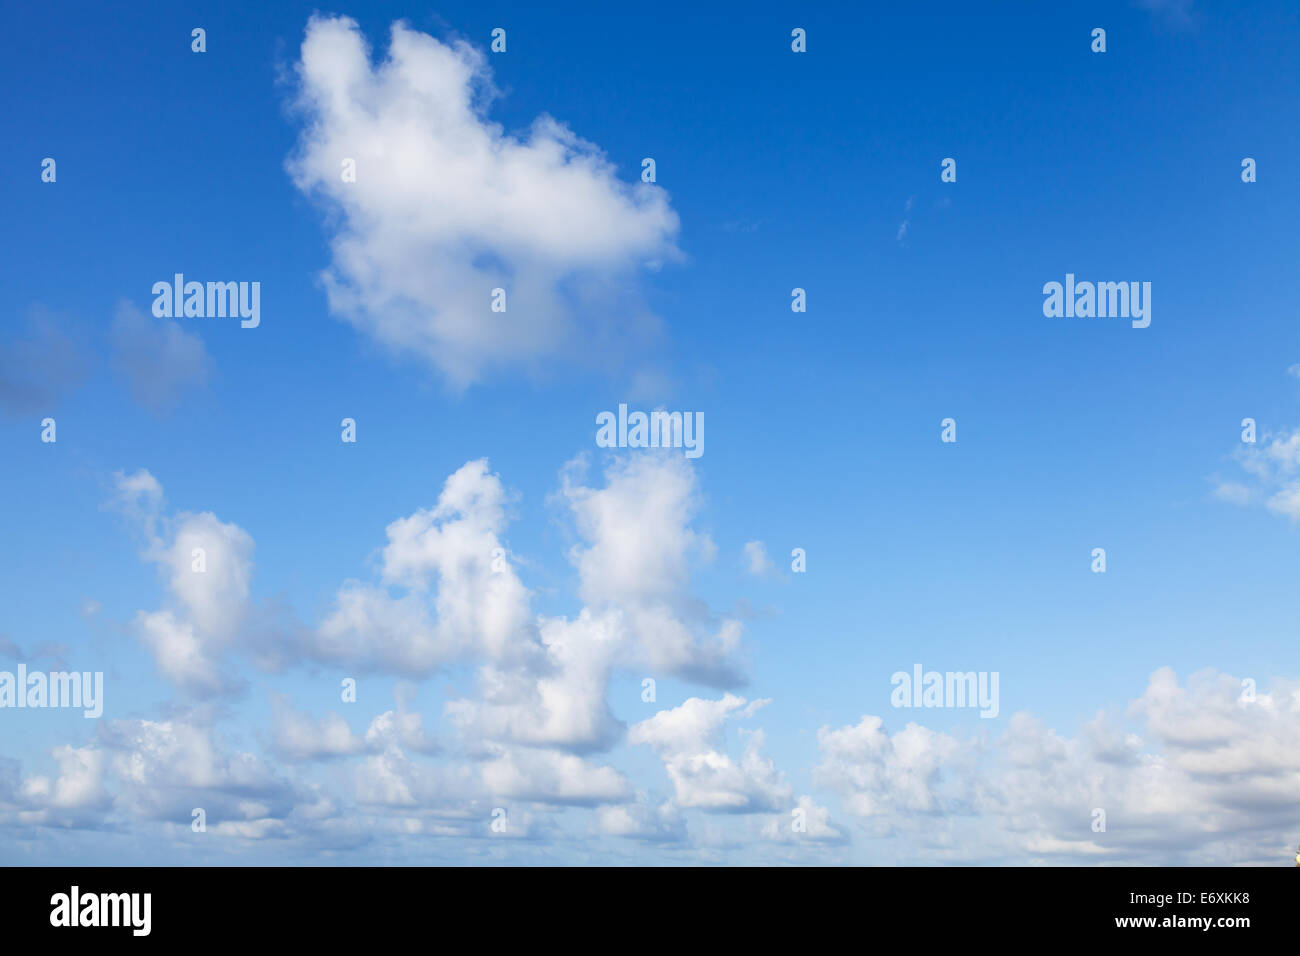 Bright blue sky background texture with white clouds Stock Photo